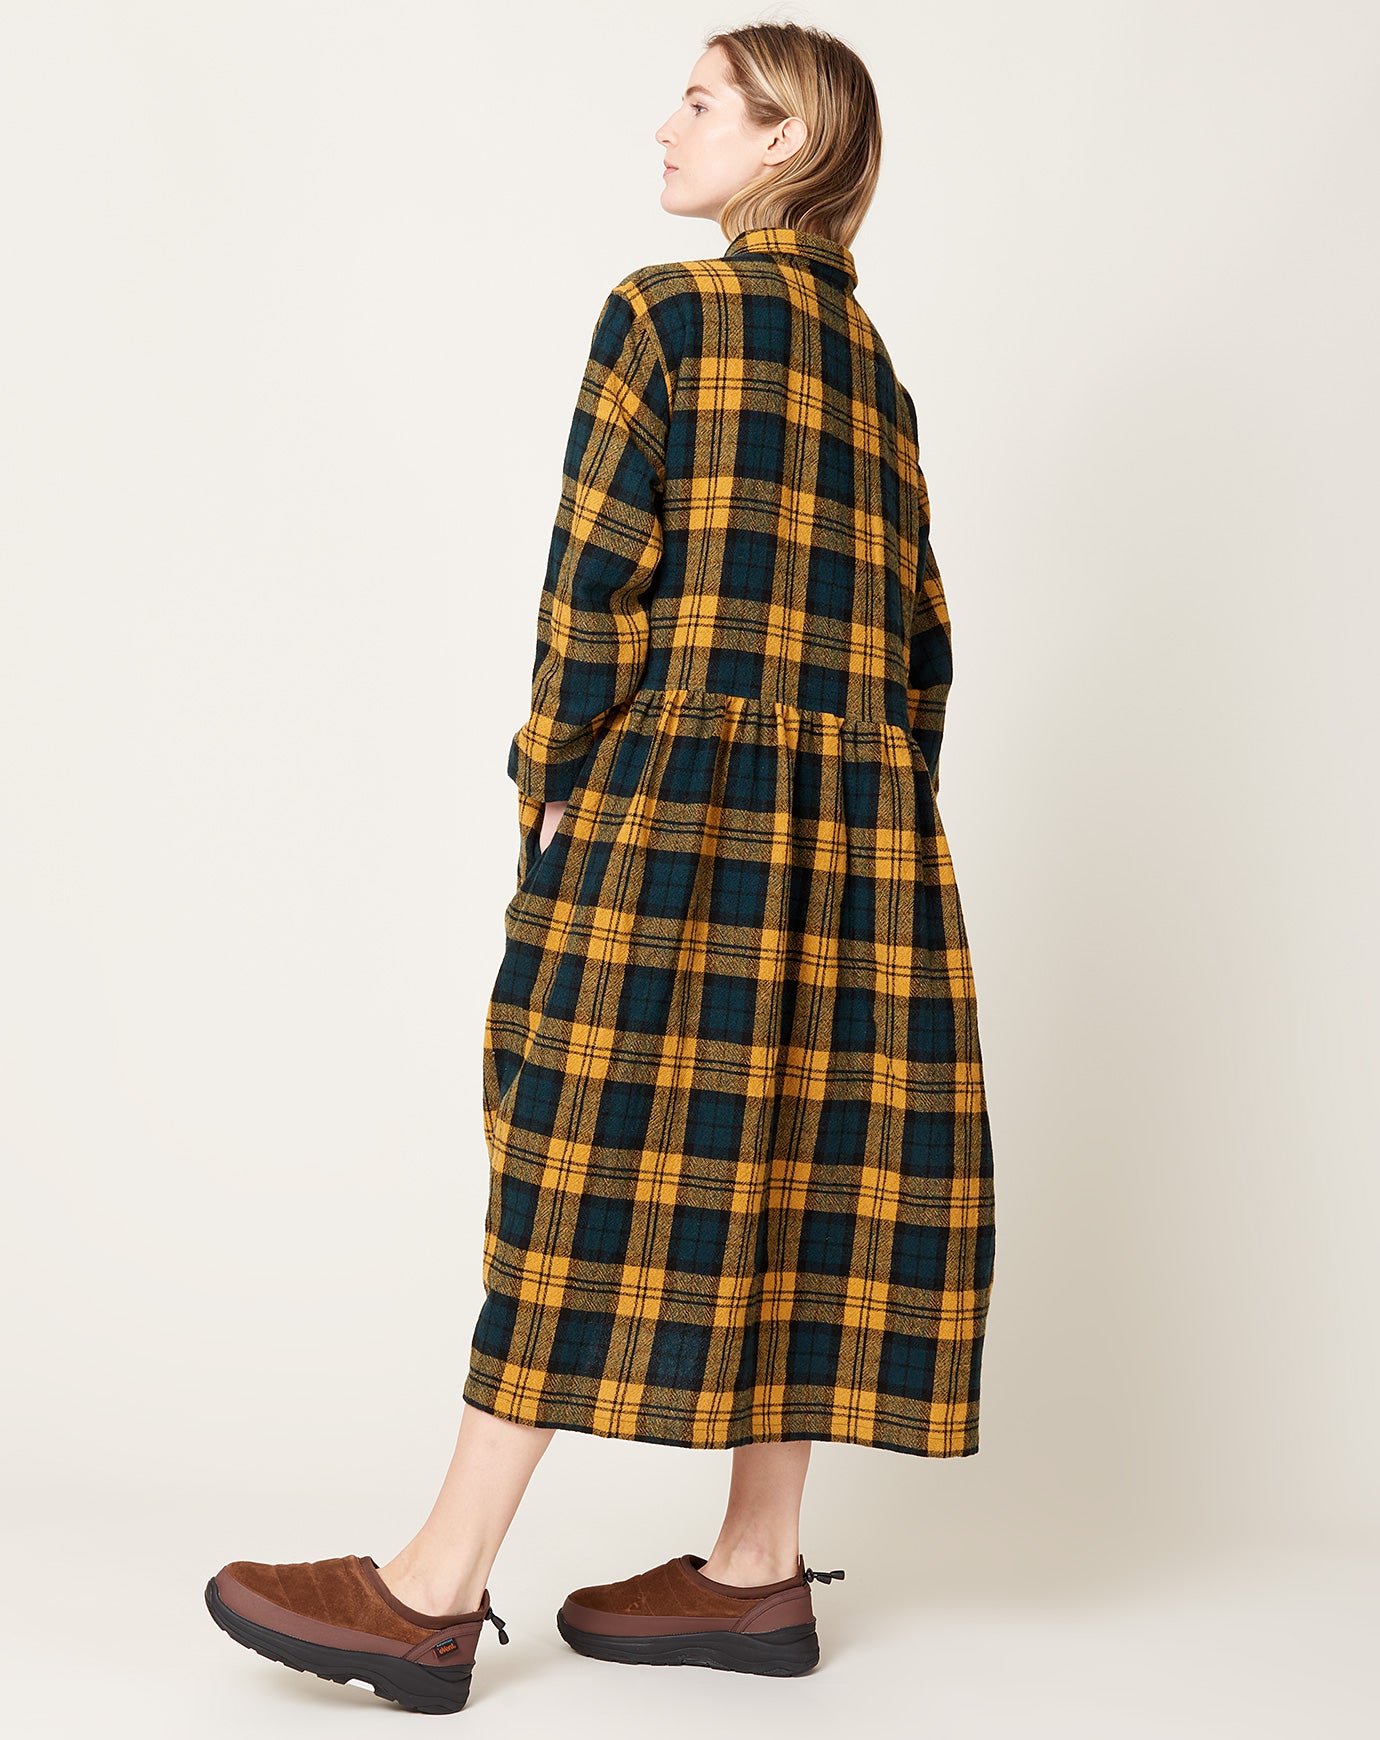 Ichi Wool Plaid Dress in Yellow and Green